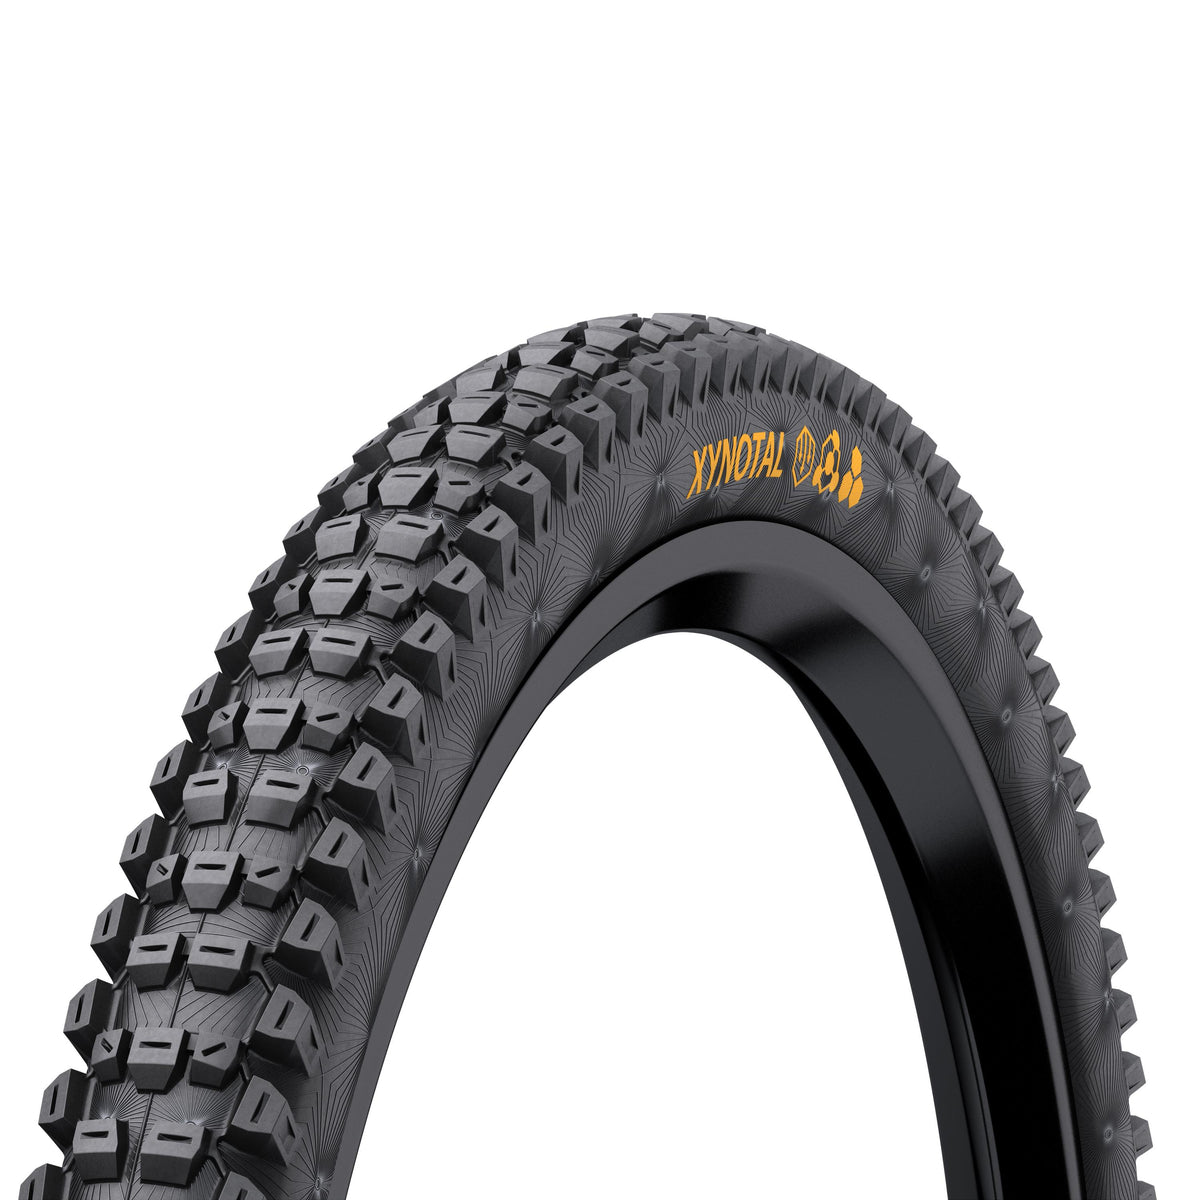 Continental Xynotal Downhill Mtb Tyre